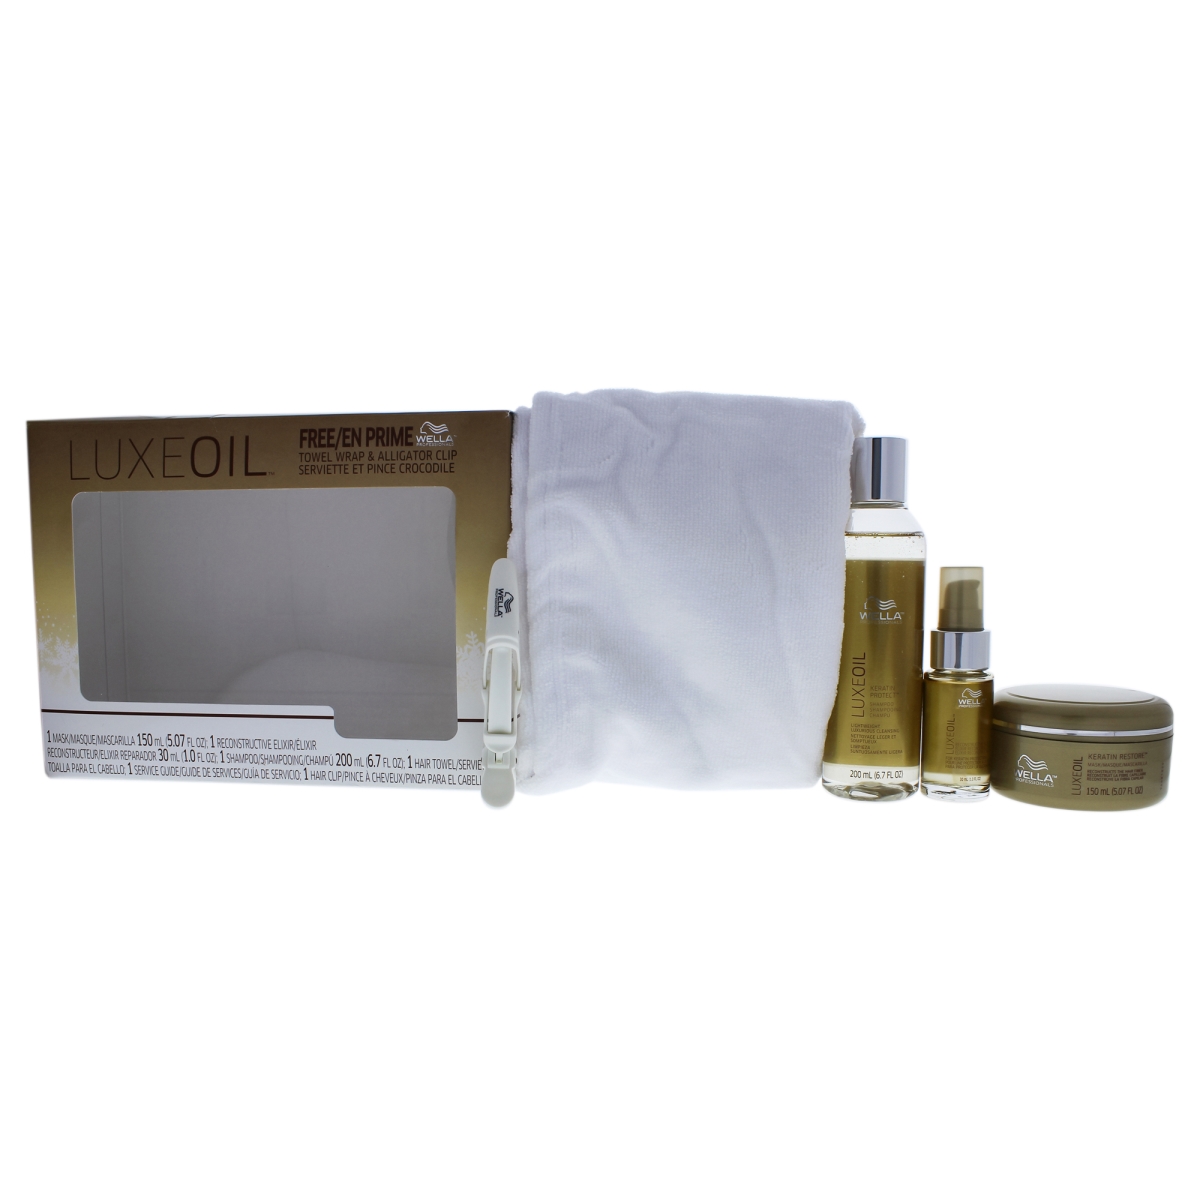 I0091574 Luxe Oil Kit For Unisex - 5 Piece